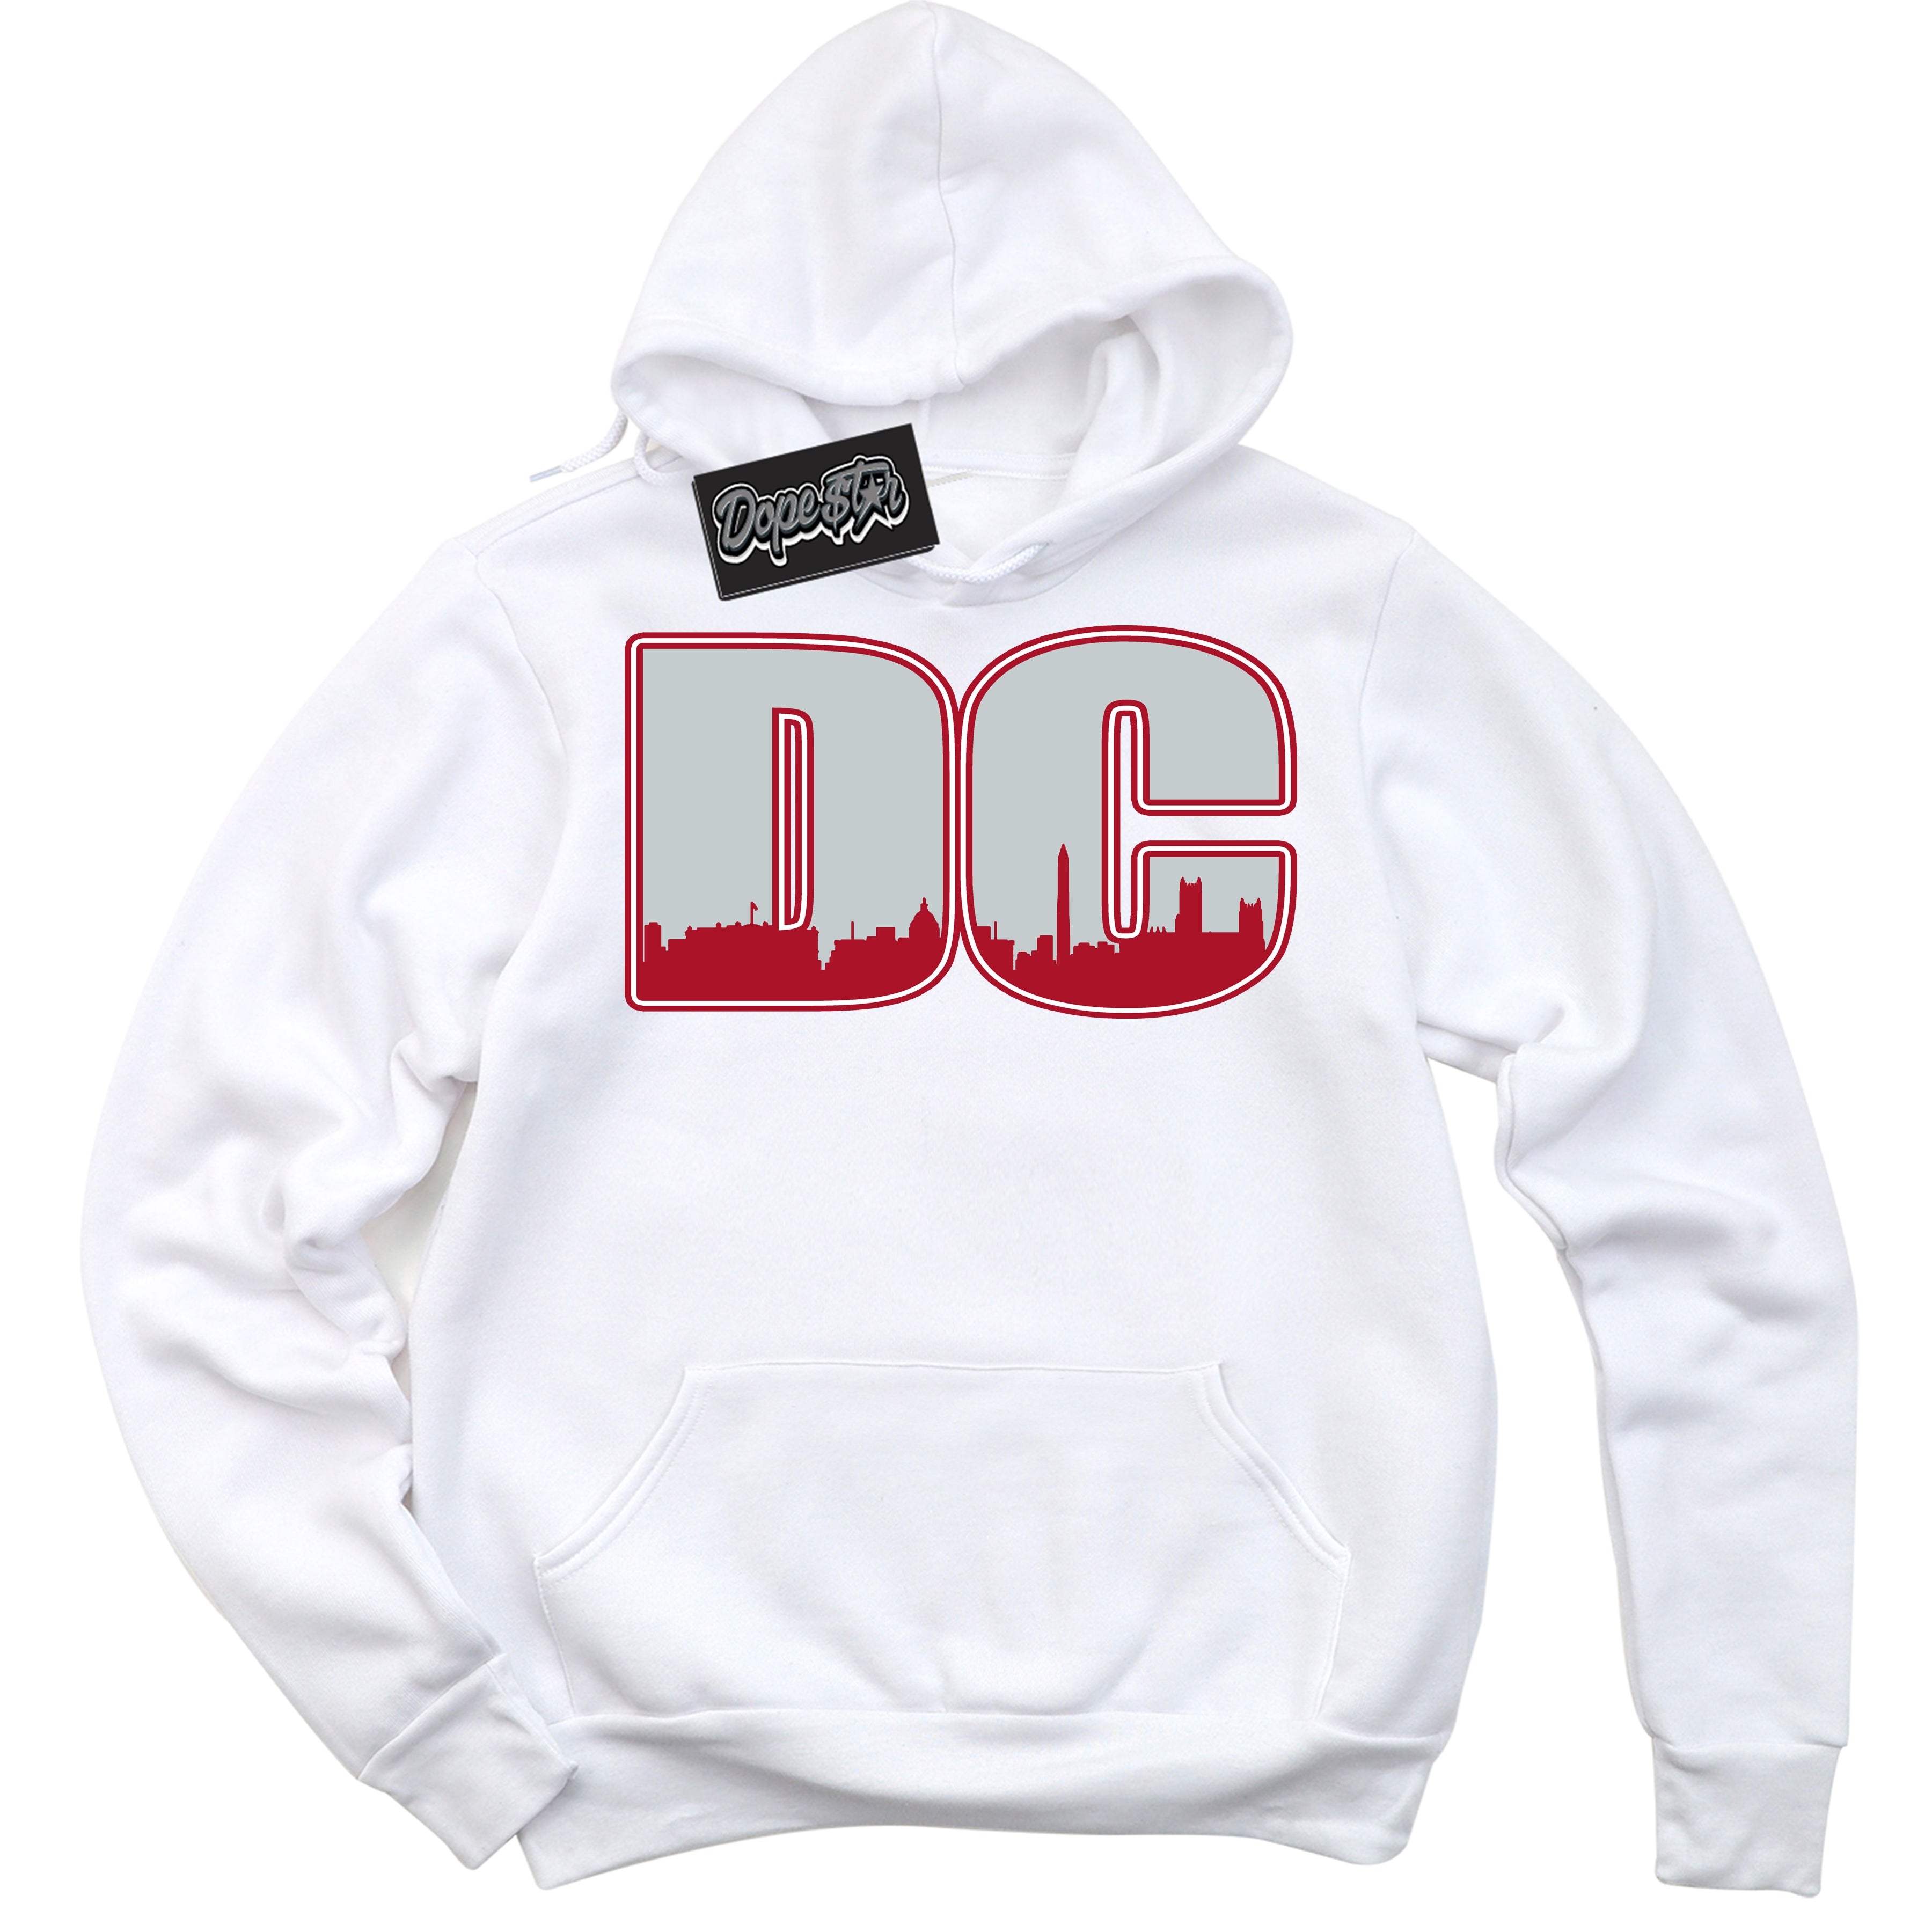 Cool White Hoodie with “ DC ”  design that Perfectly Matches Reverse Ultraman Sneakers.